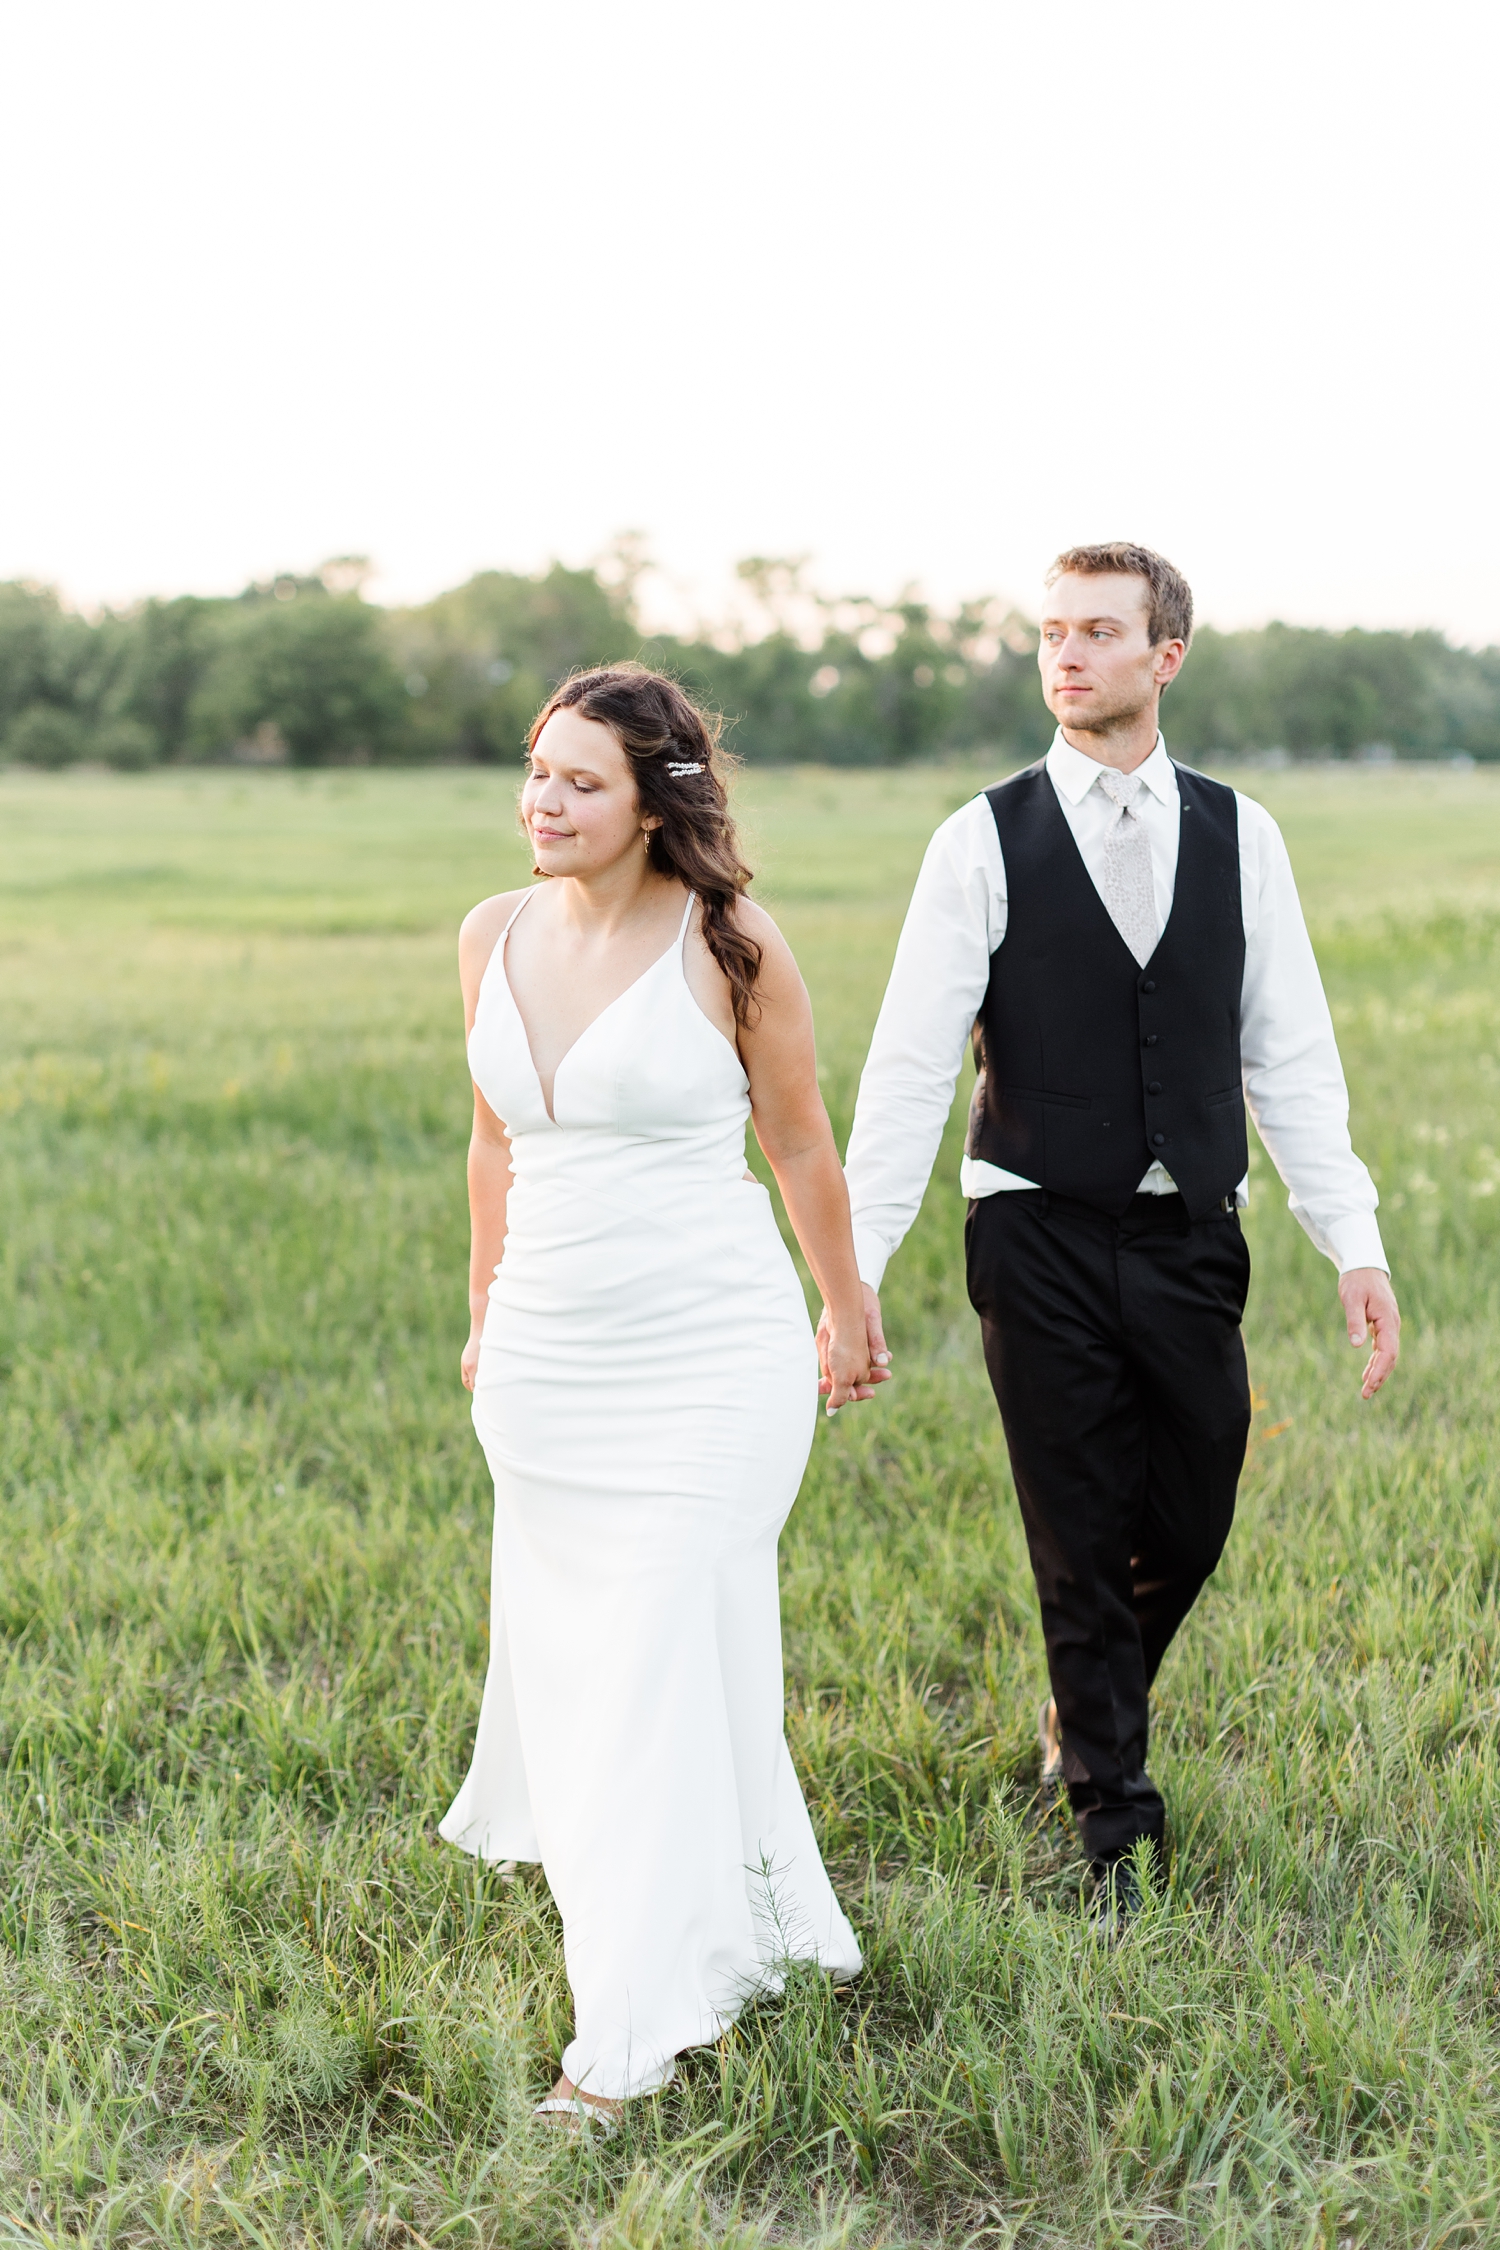 Alyssa and Grant walk in a grassy pasture at sunset on their wedding day in Emmetsburg, IA | CB Studio